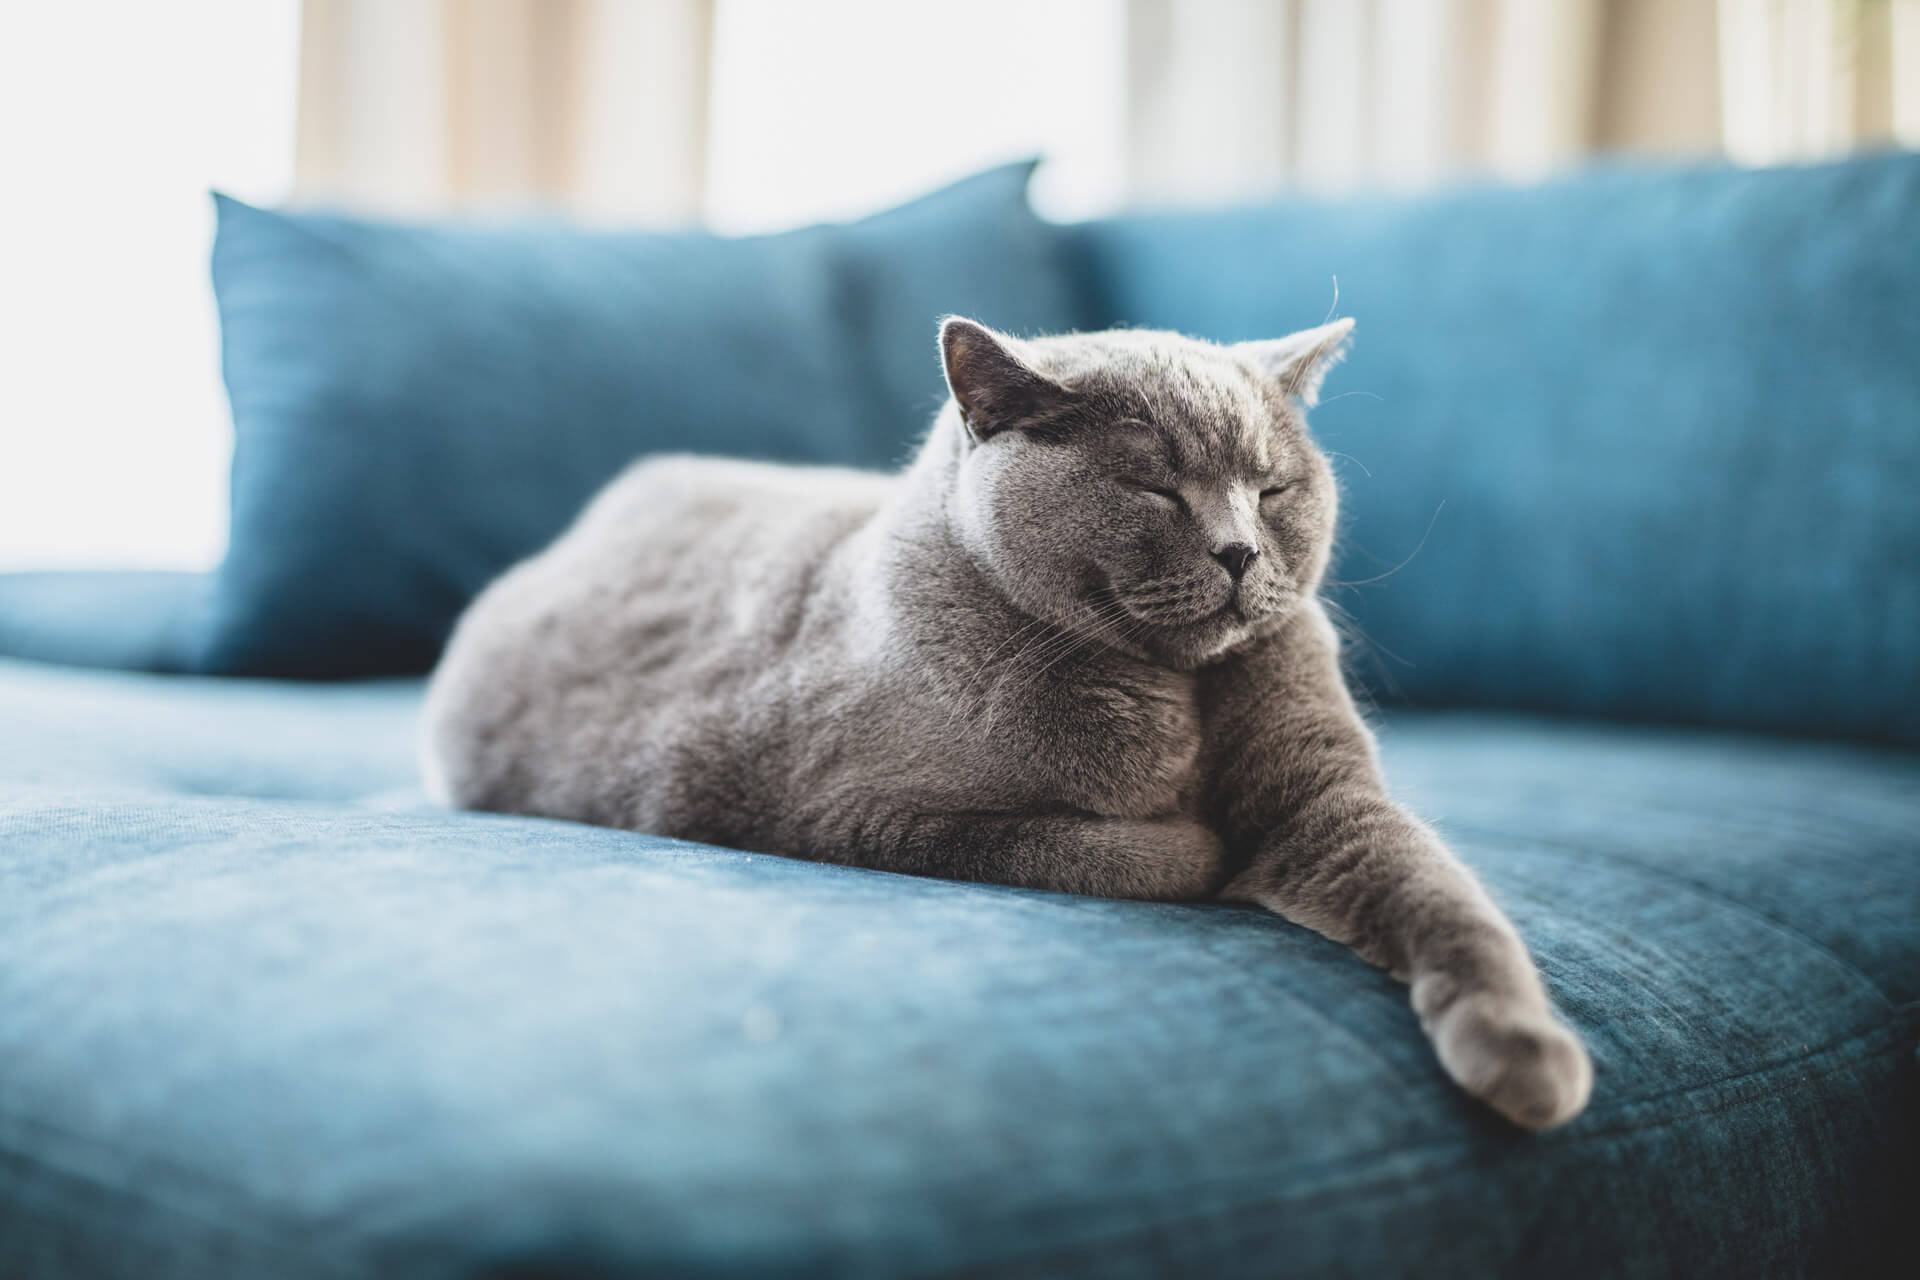 Why Do Cats Sleep So Much? Cat Sleeping Patterns, Explained!